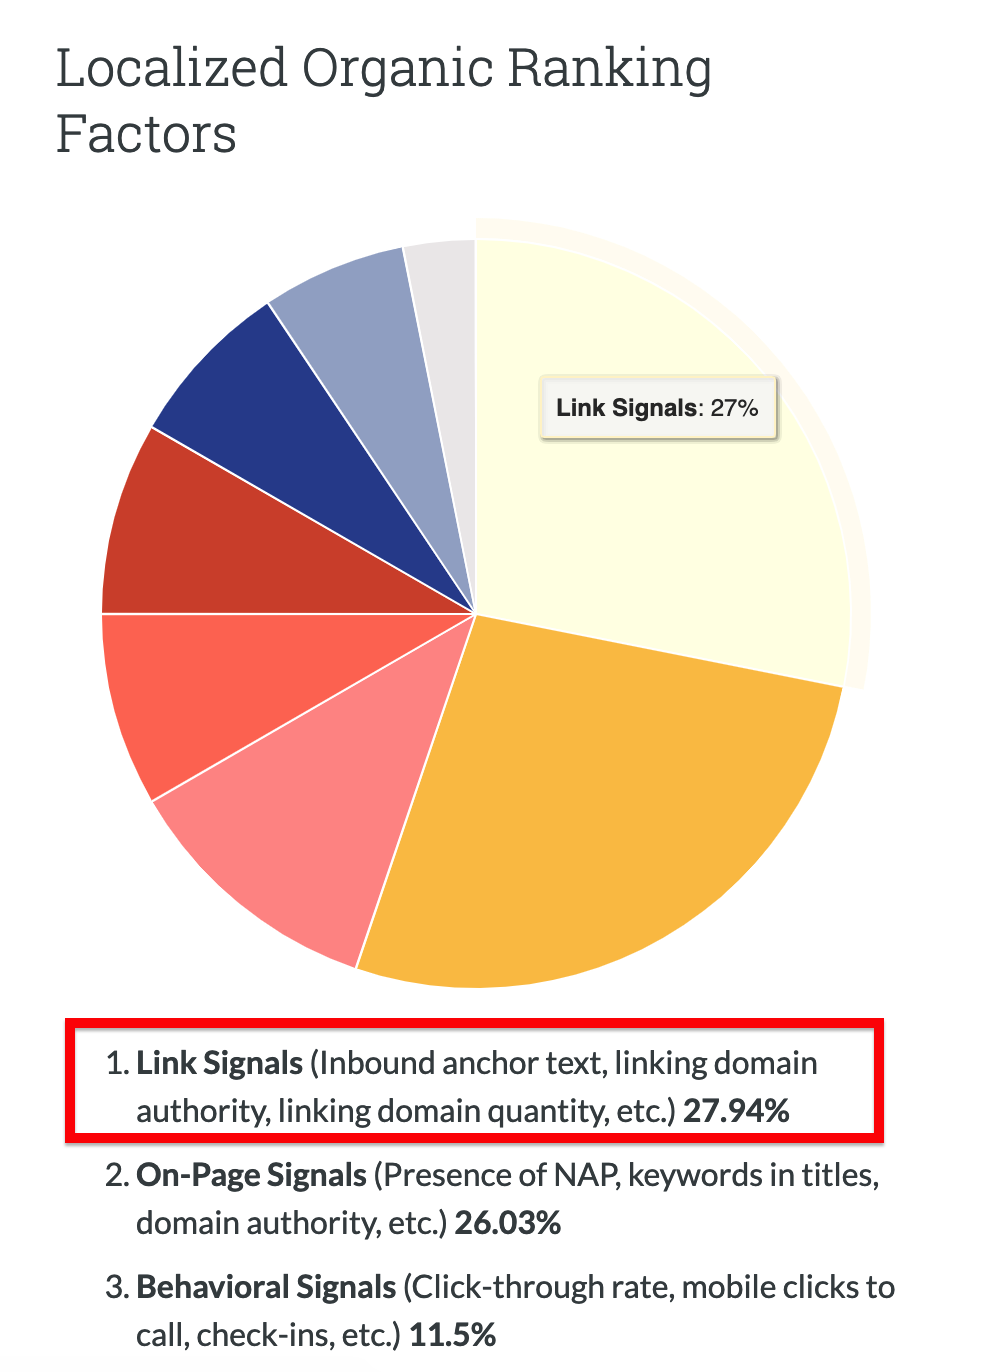 Localized Organic Ranking Factor pie graph from moz